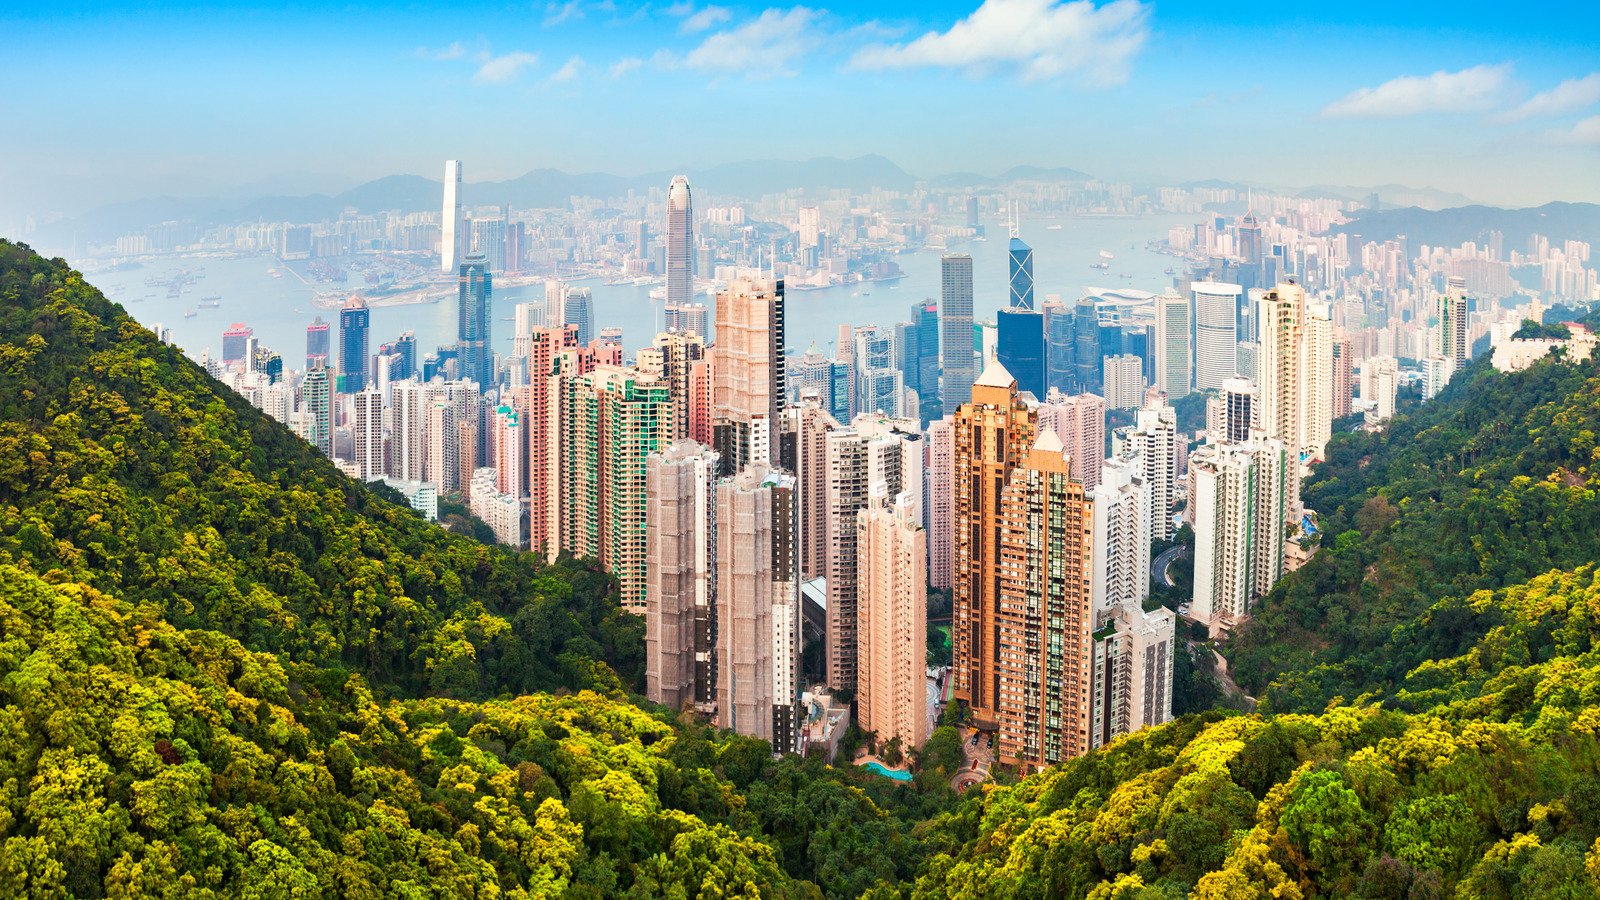 Hong Kong's Victoria Peak Offers Some Of The Most Stunning Views Of The City And Surrounding Hills - Explore